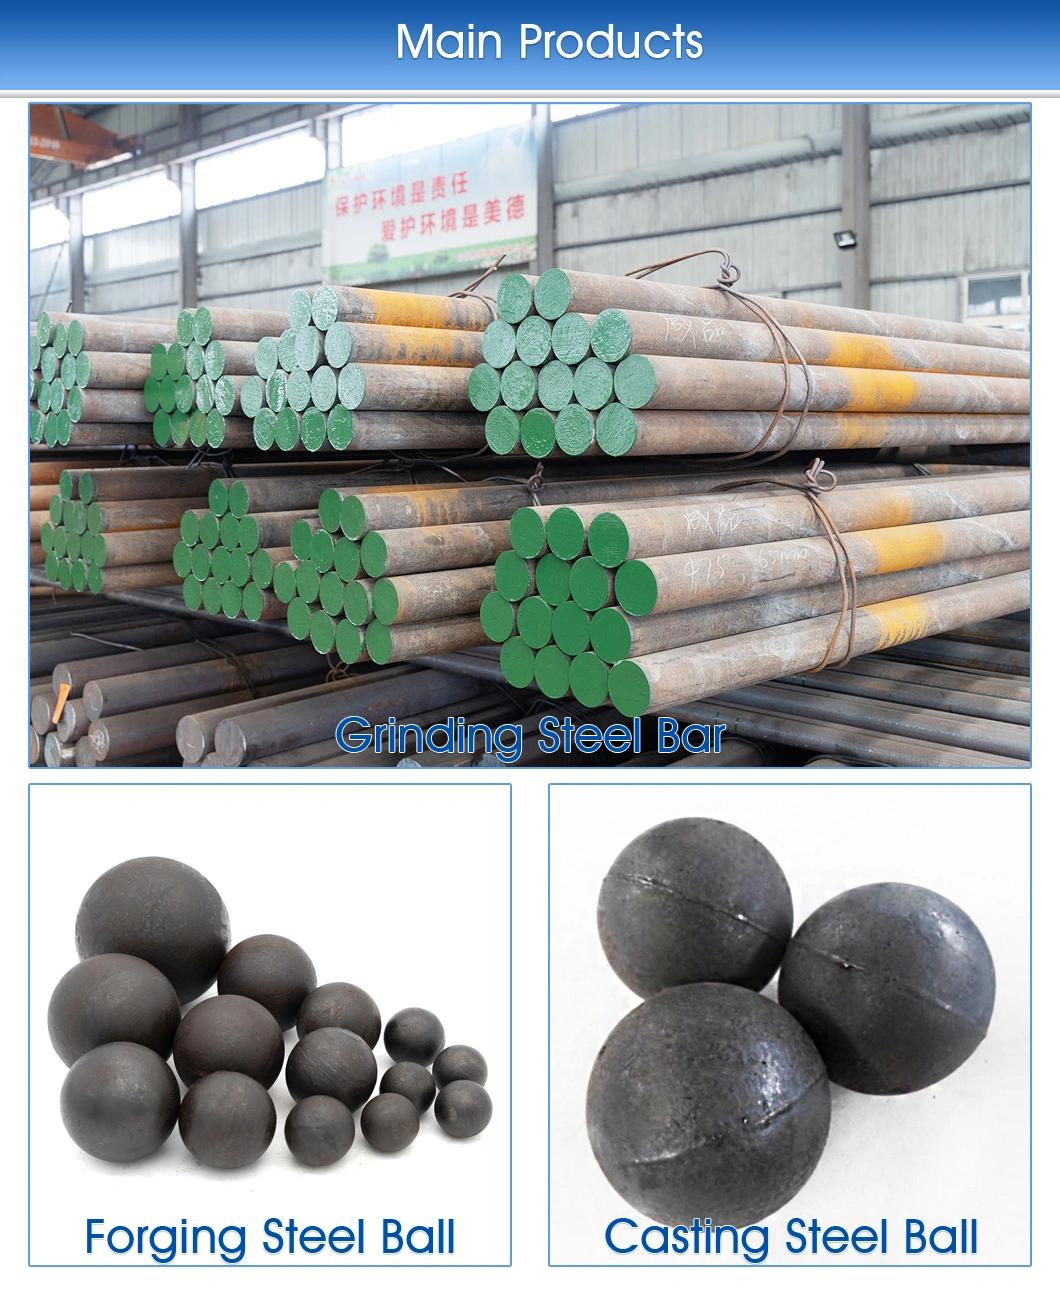 High Quality Abrasive Materials Grinding Media Ball for Mines Power Station